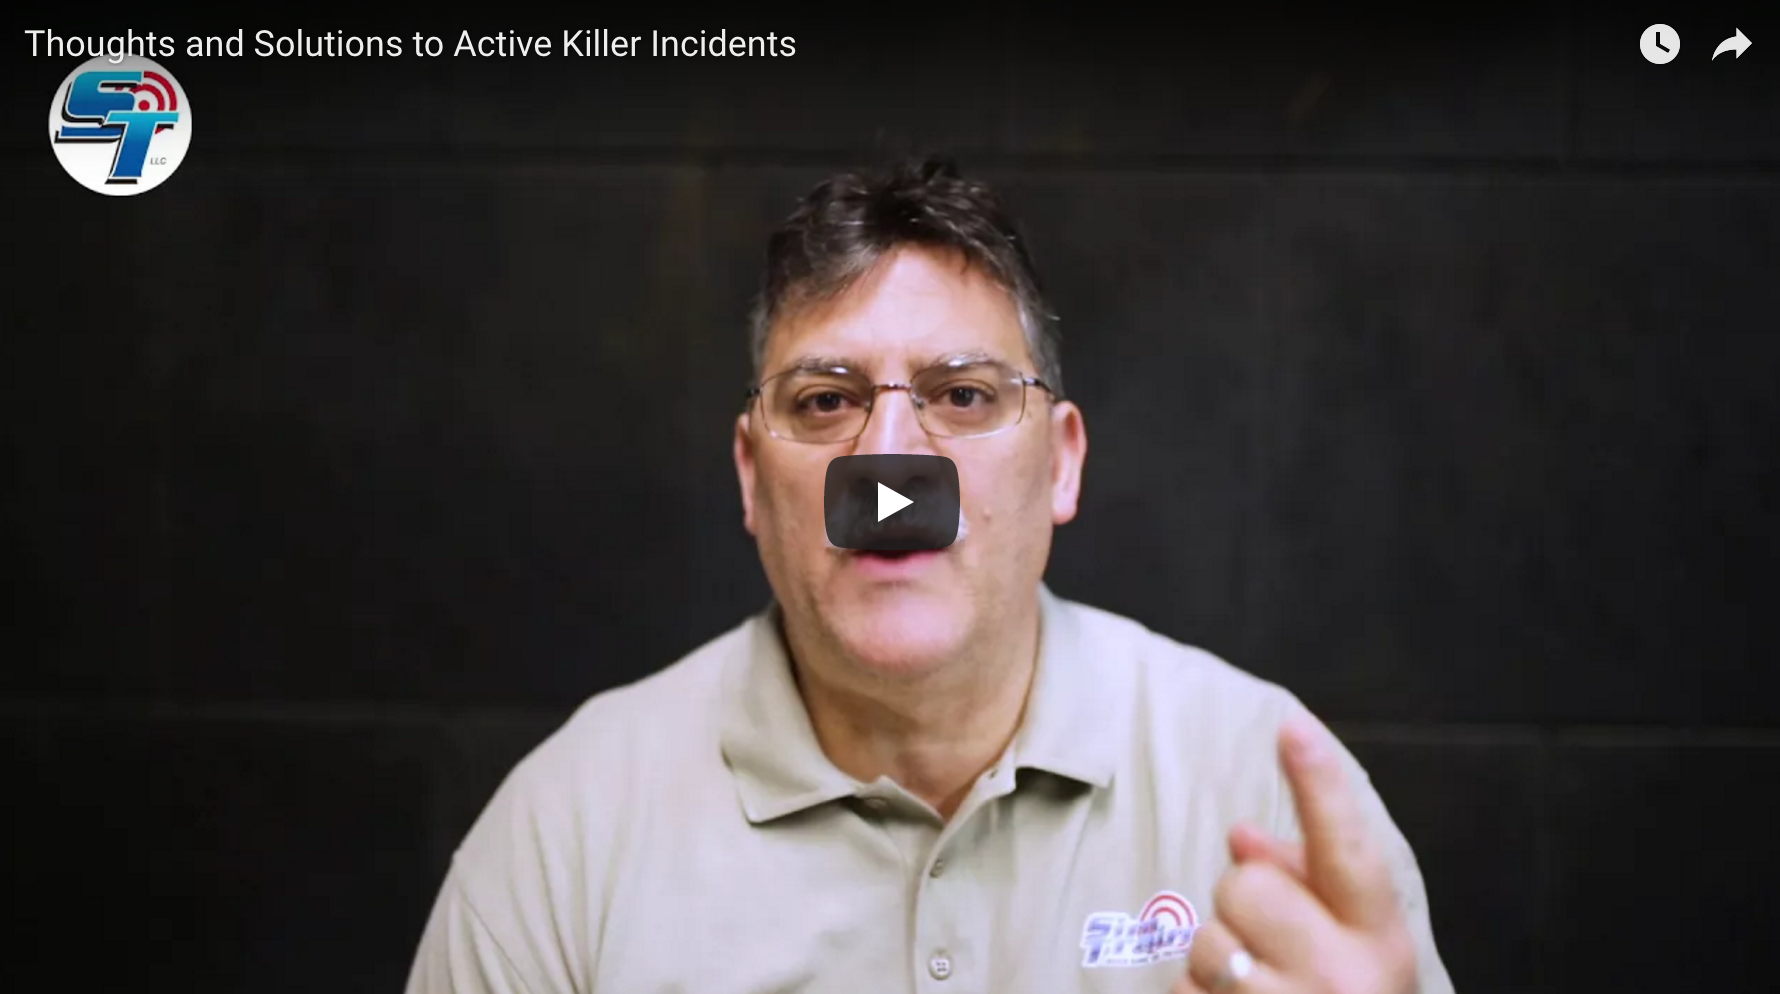 Thoughts & Solutions to Active Shooter Incidents